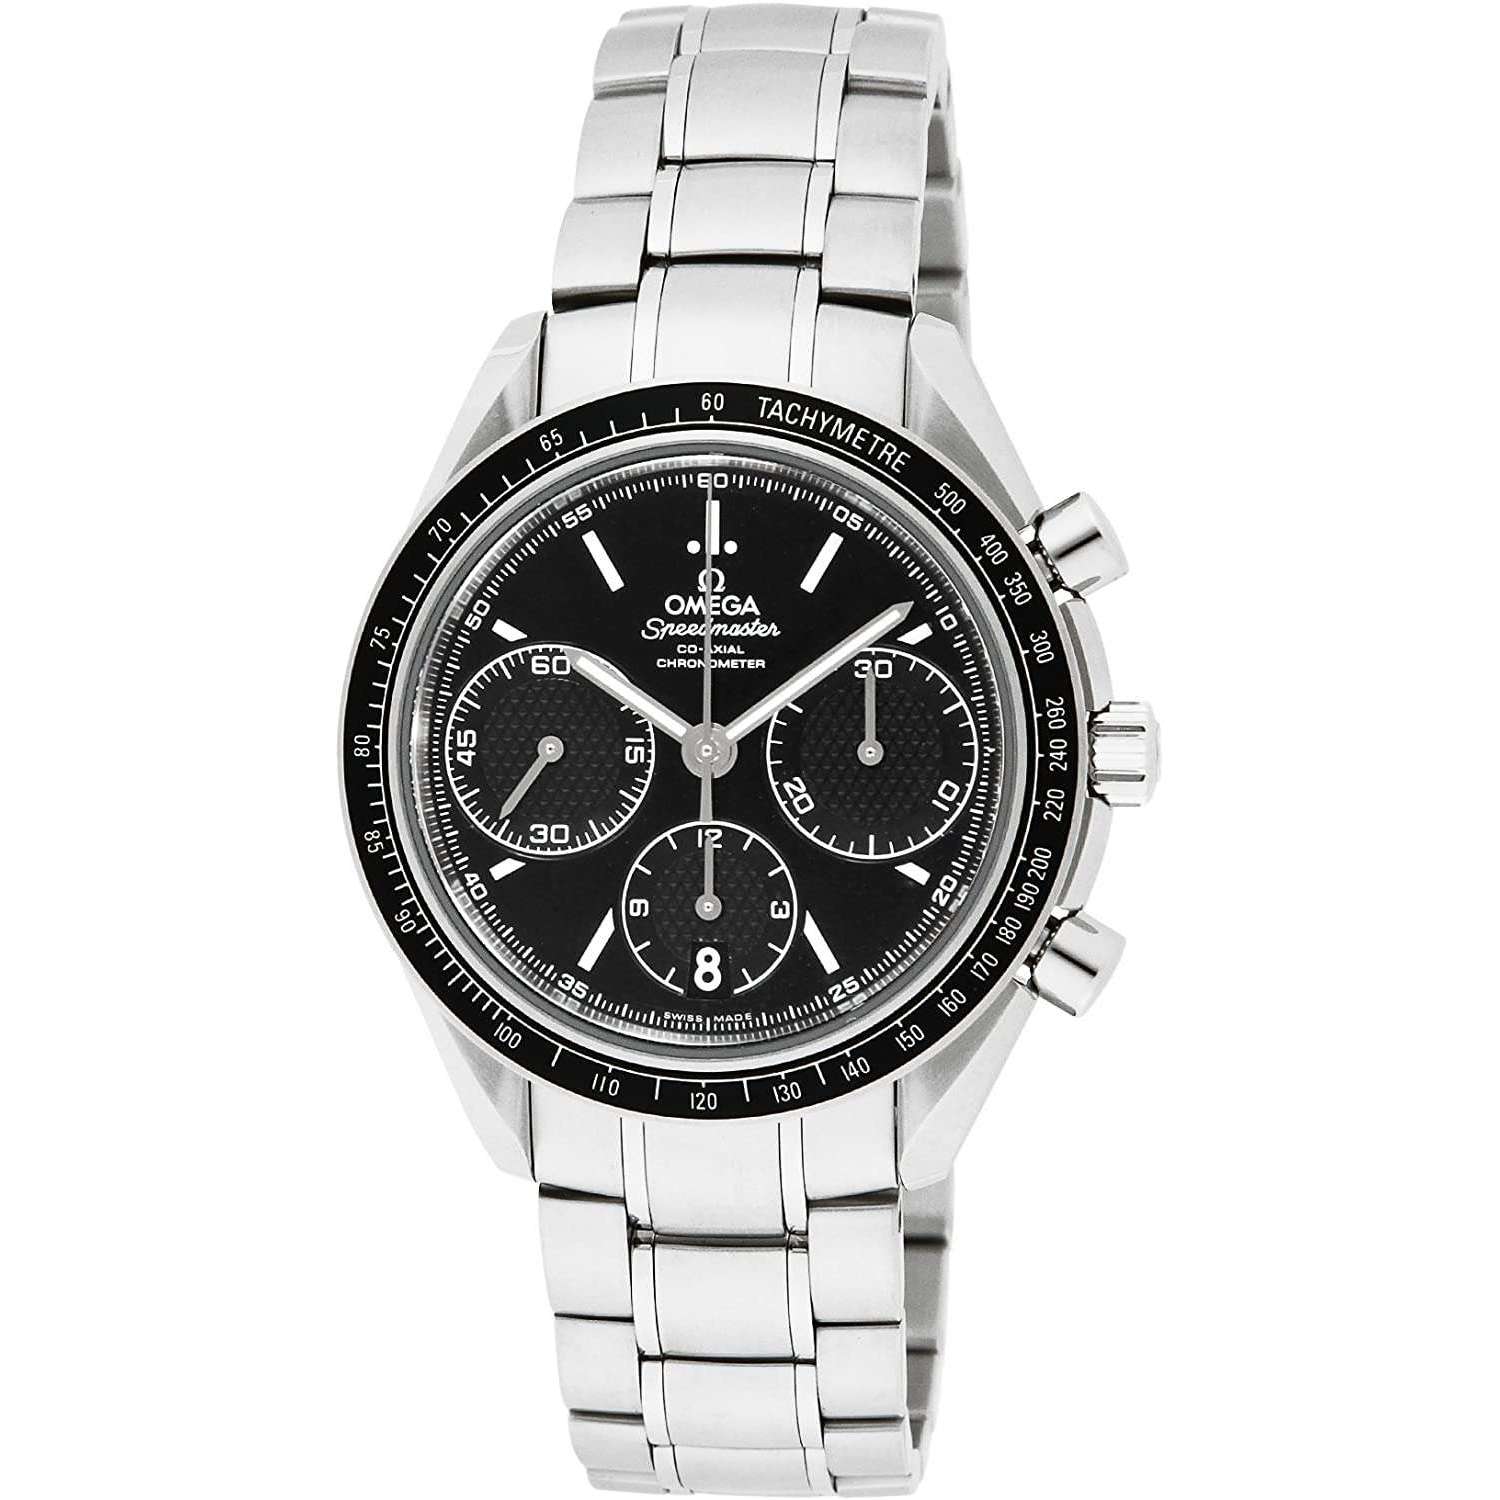 ROOK JAPAN:OMEGA SPEEDMASTER RACING CO-AXIAL CHRONOMETER 40 MM MEN WATCH 326.30.40.50.01.001,Luxury Watch,Omega